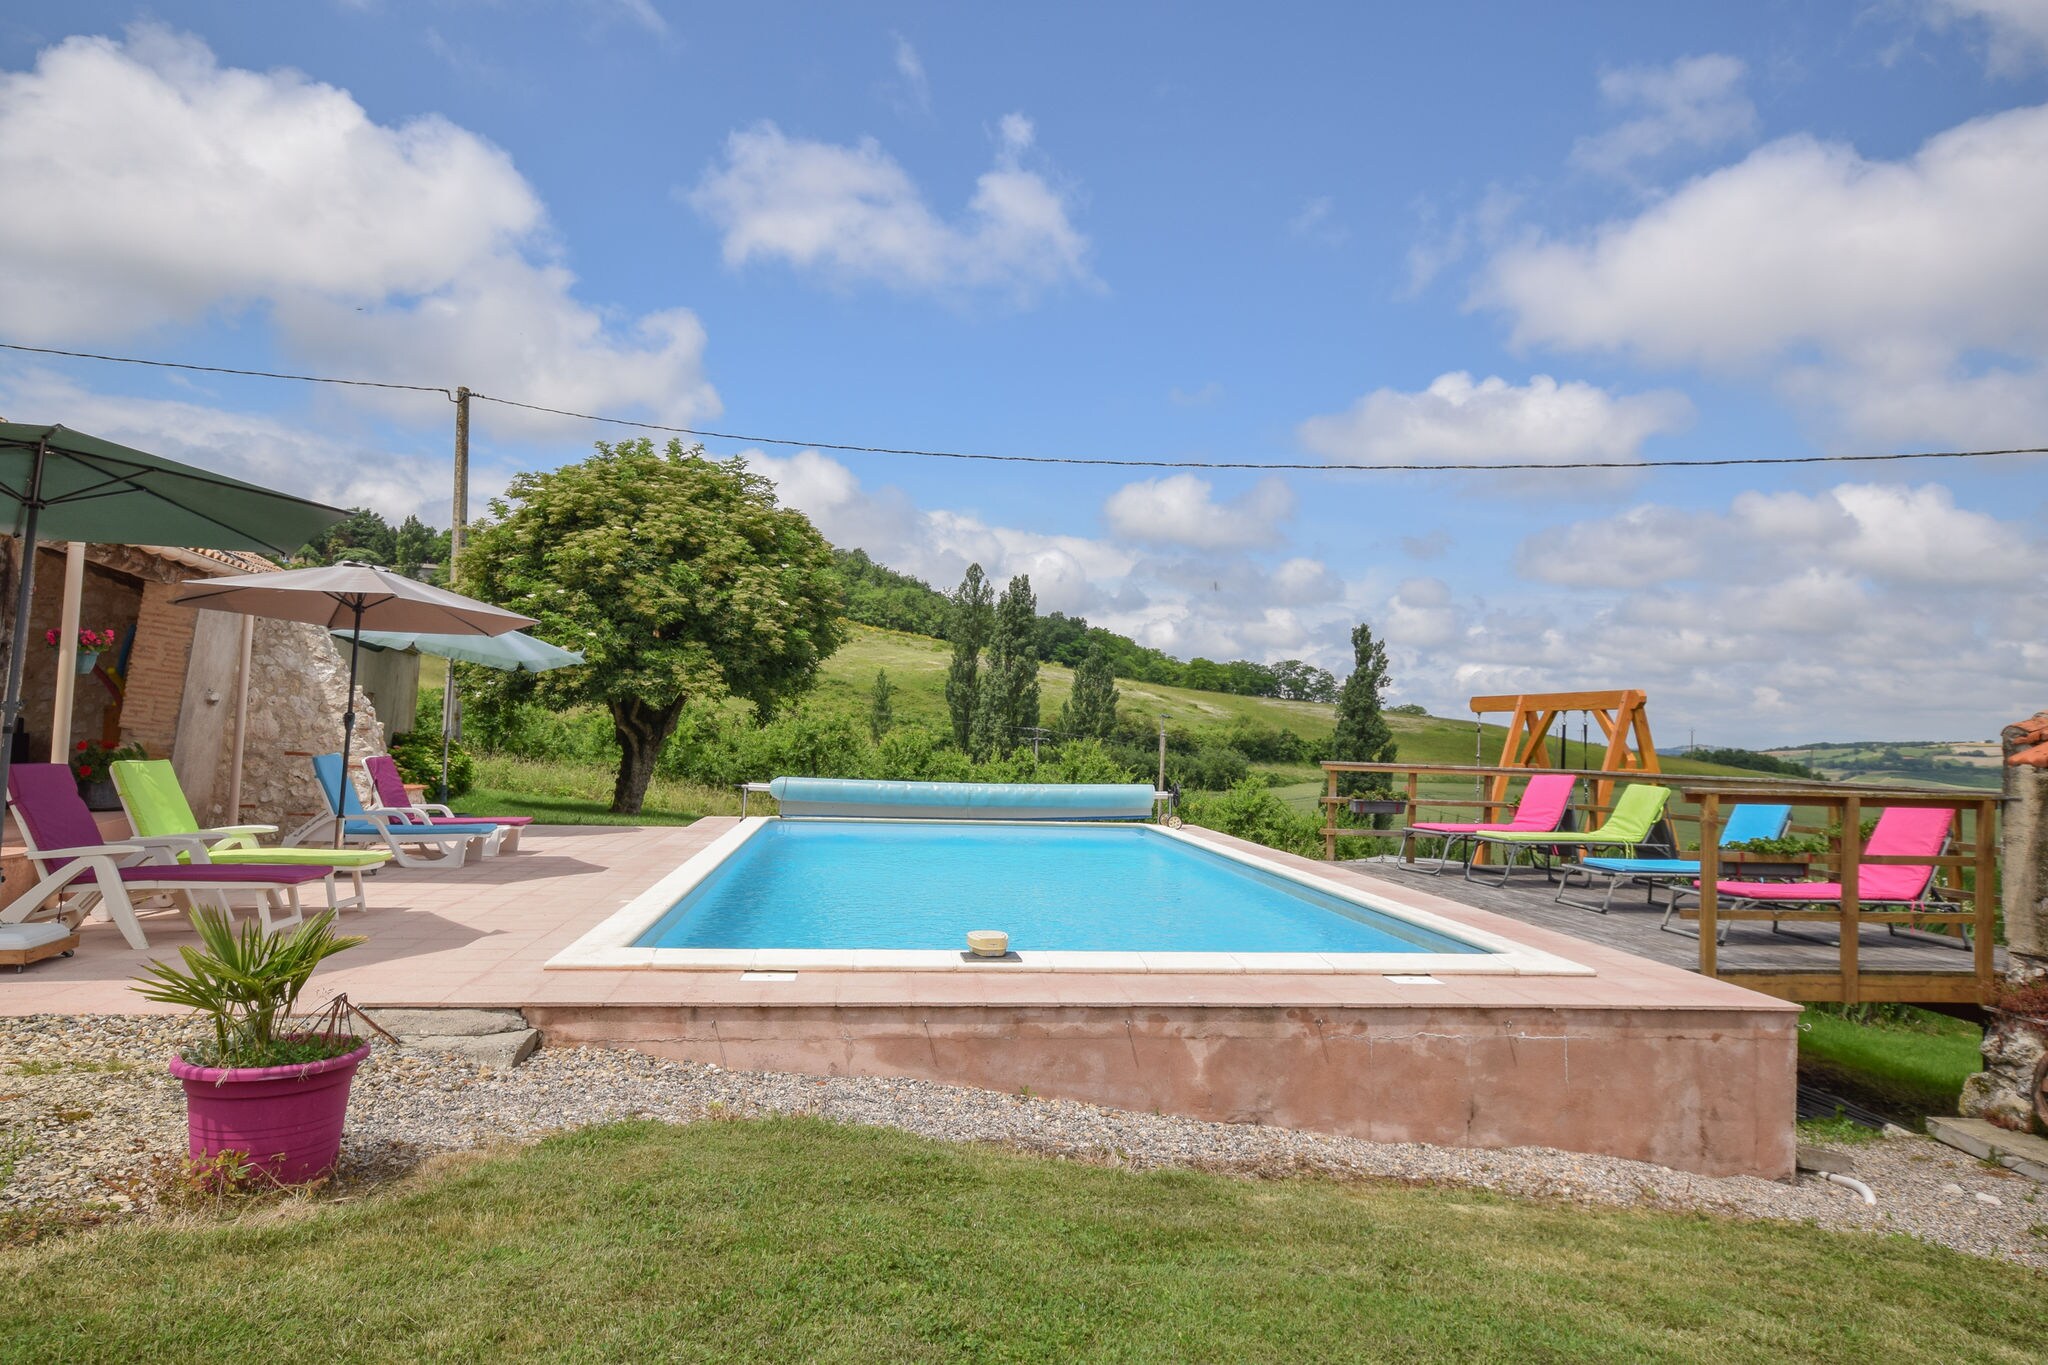 Spacious villa with large terraces and private pool, set in rural surroundings.